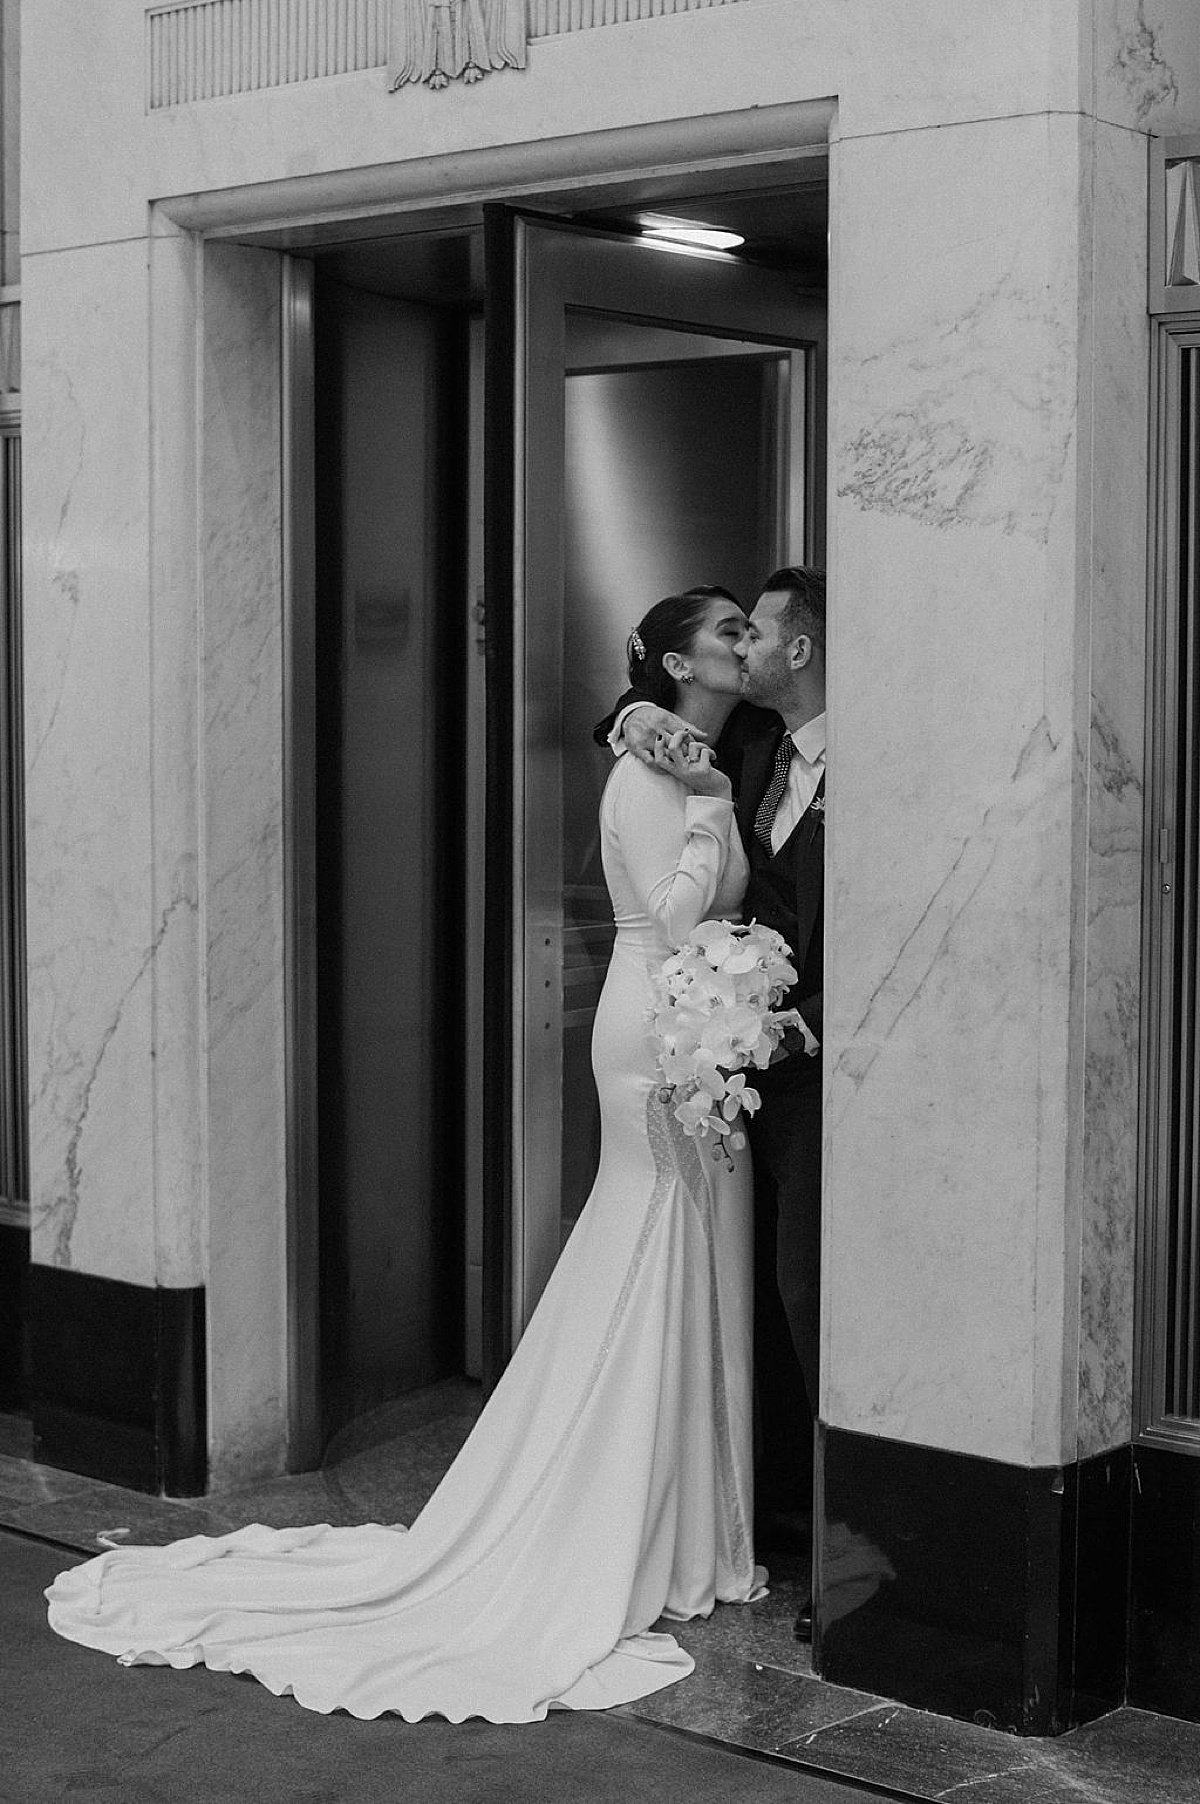 elegant bride with orchid bouquet kisses groom outside gold doors during celebration at old Chicago post office